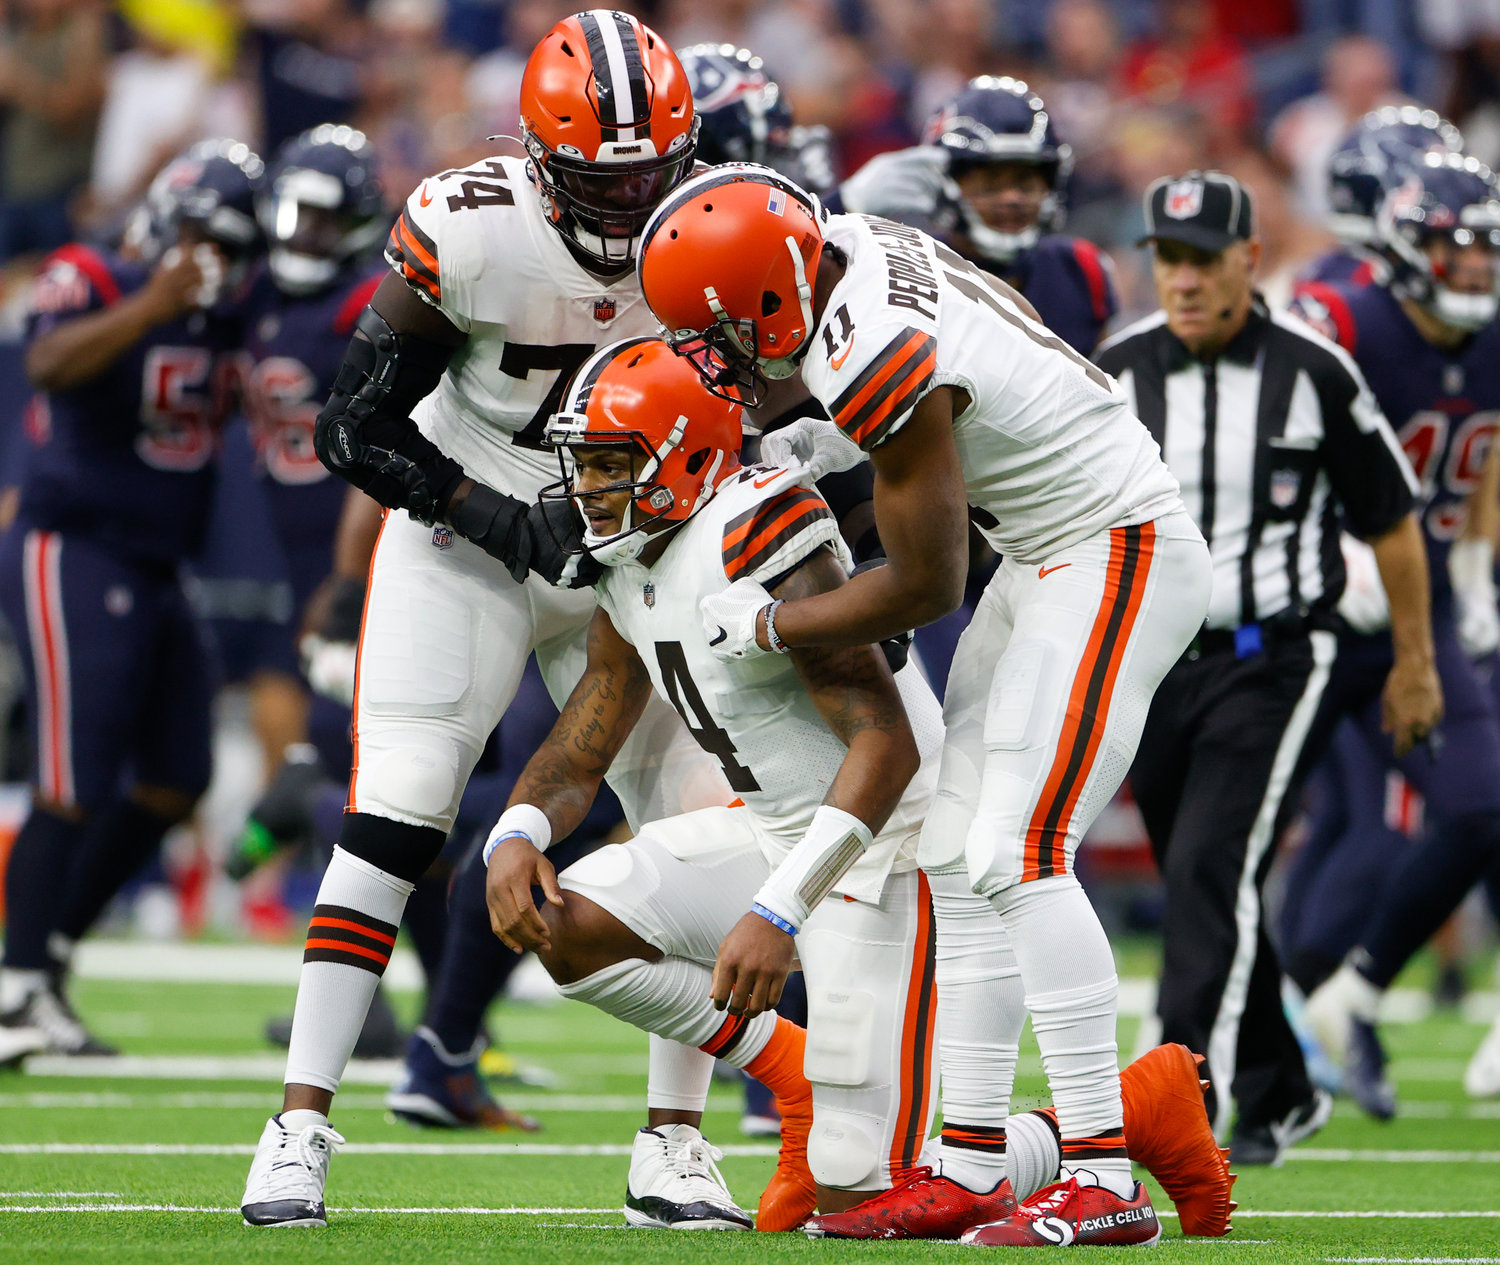 Cleveland Browns offensive tackle Chris Hubbard (74) and wide receiver Donovan Peoples-Jones (11) help quarterback Deshaun Watson (4) up after an interception during an NFL game between the Houston Texans and the Cleveland Browns on Dec. 4, 2022, in Houston. The Browns won, 27-14.